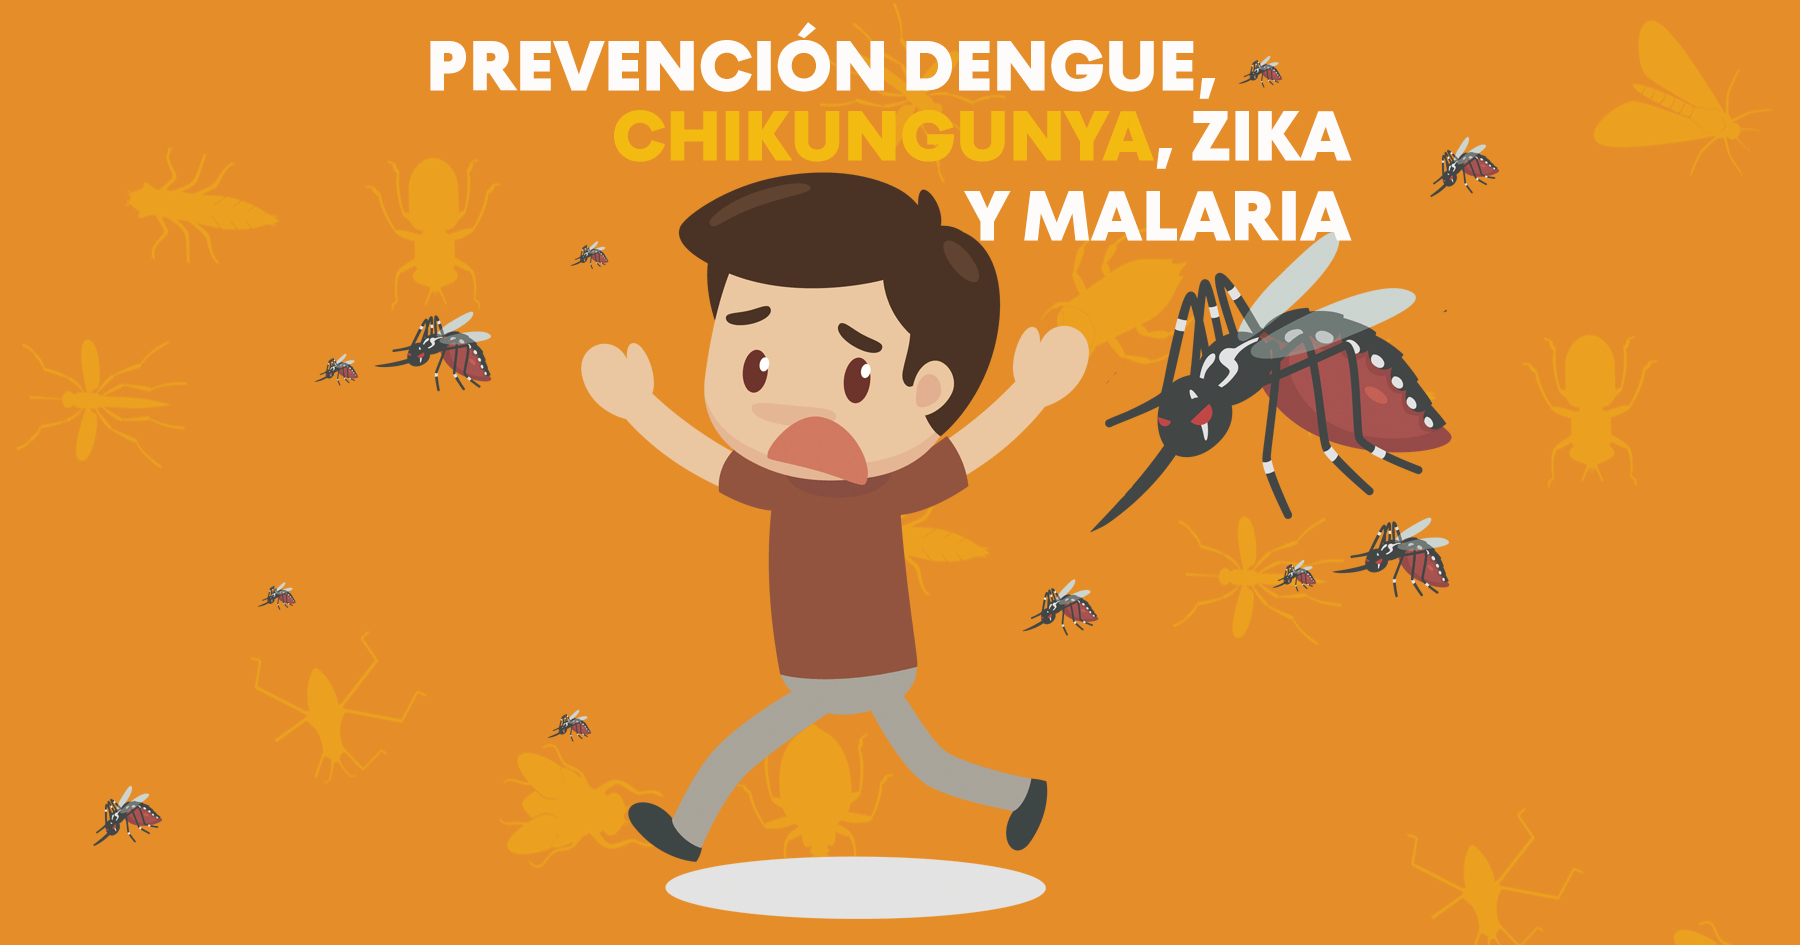 How to properly protect yourself from diseases caused by mosquitoes?